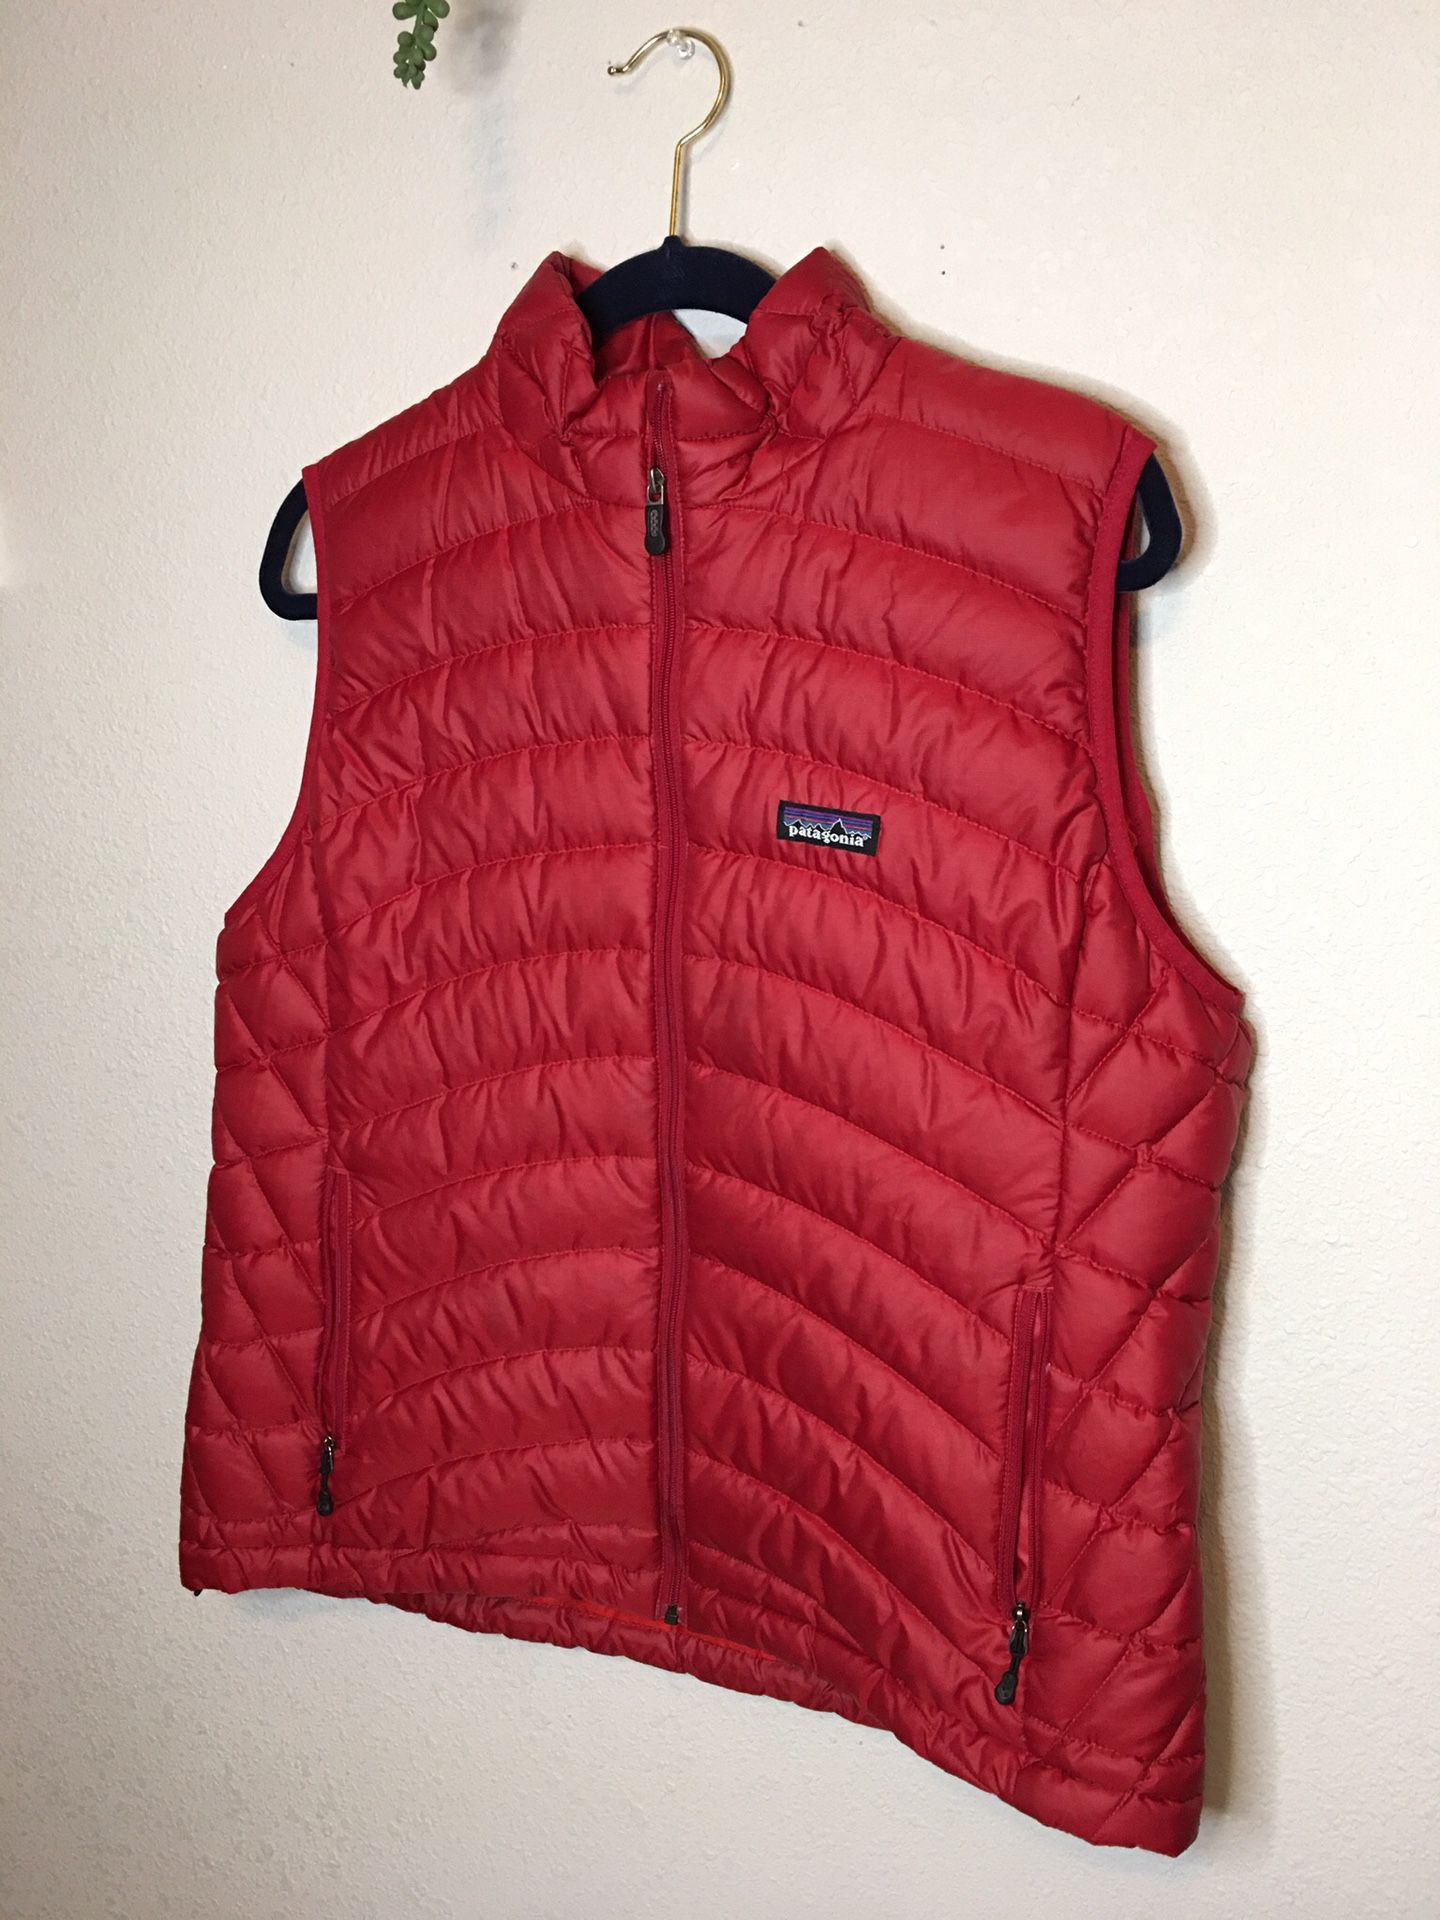 Women’s Red Patagonia Down Vest (XL)